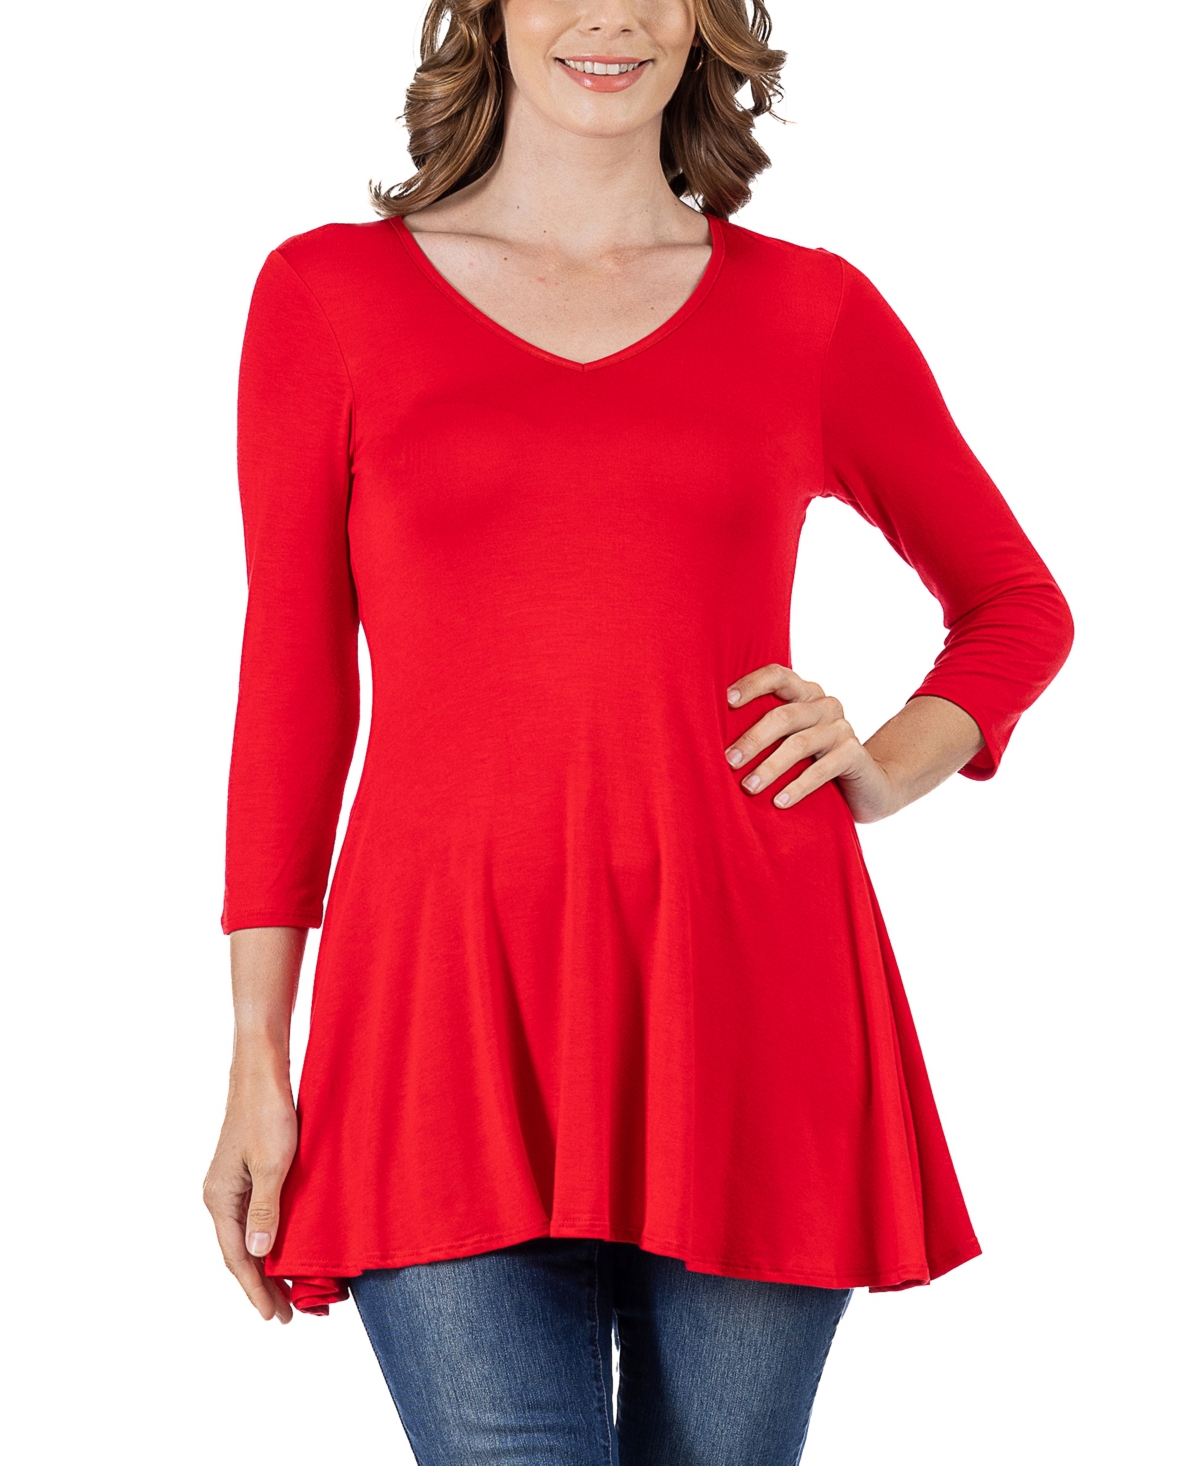 24seven Comfort Apparel Women's Three Quarter Sleeve V-neck Tunic Top In Red